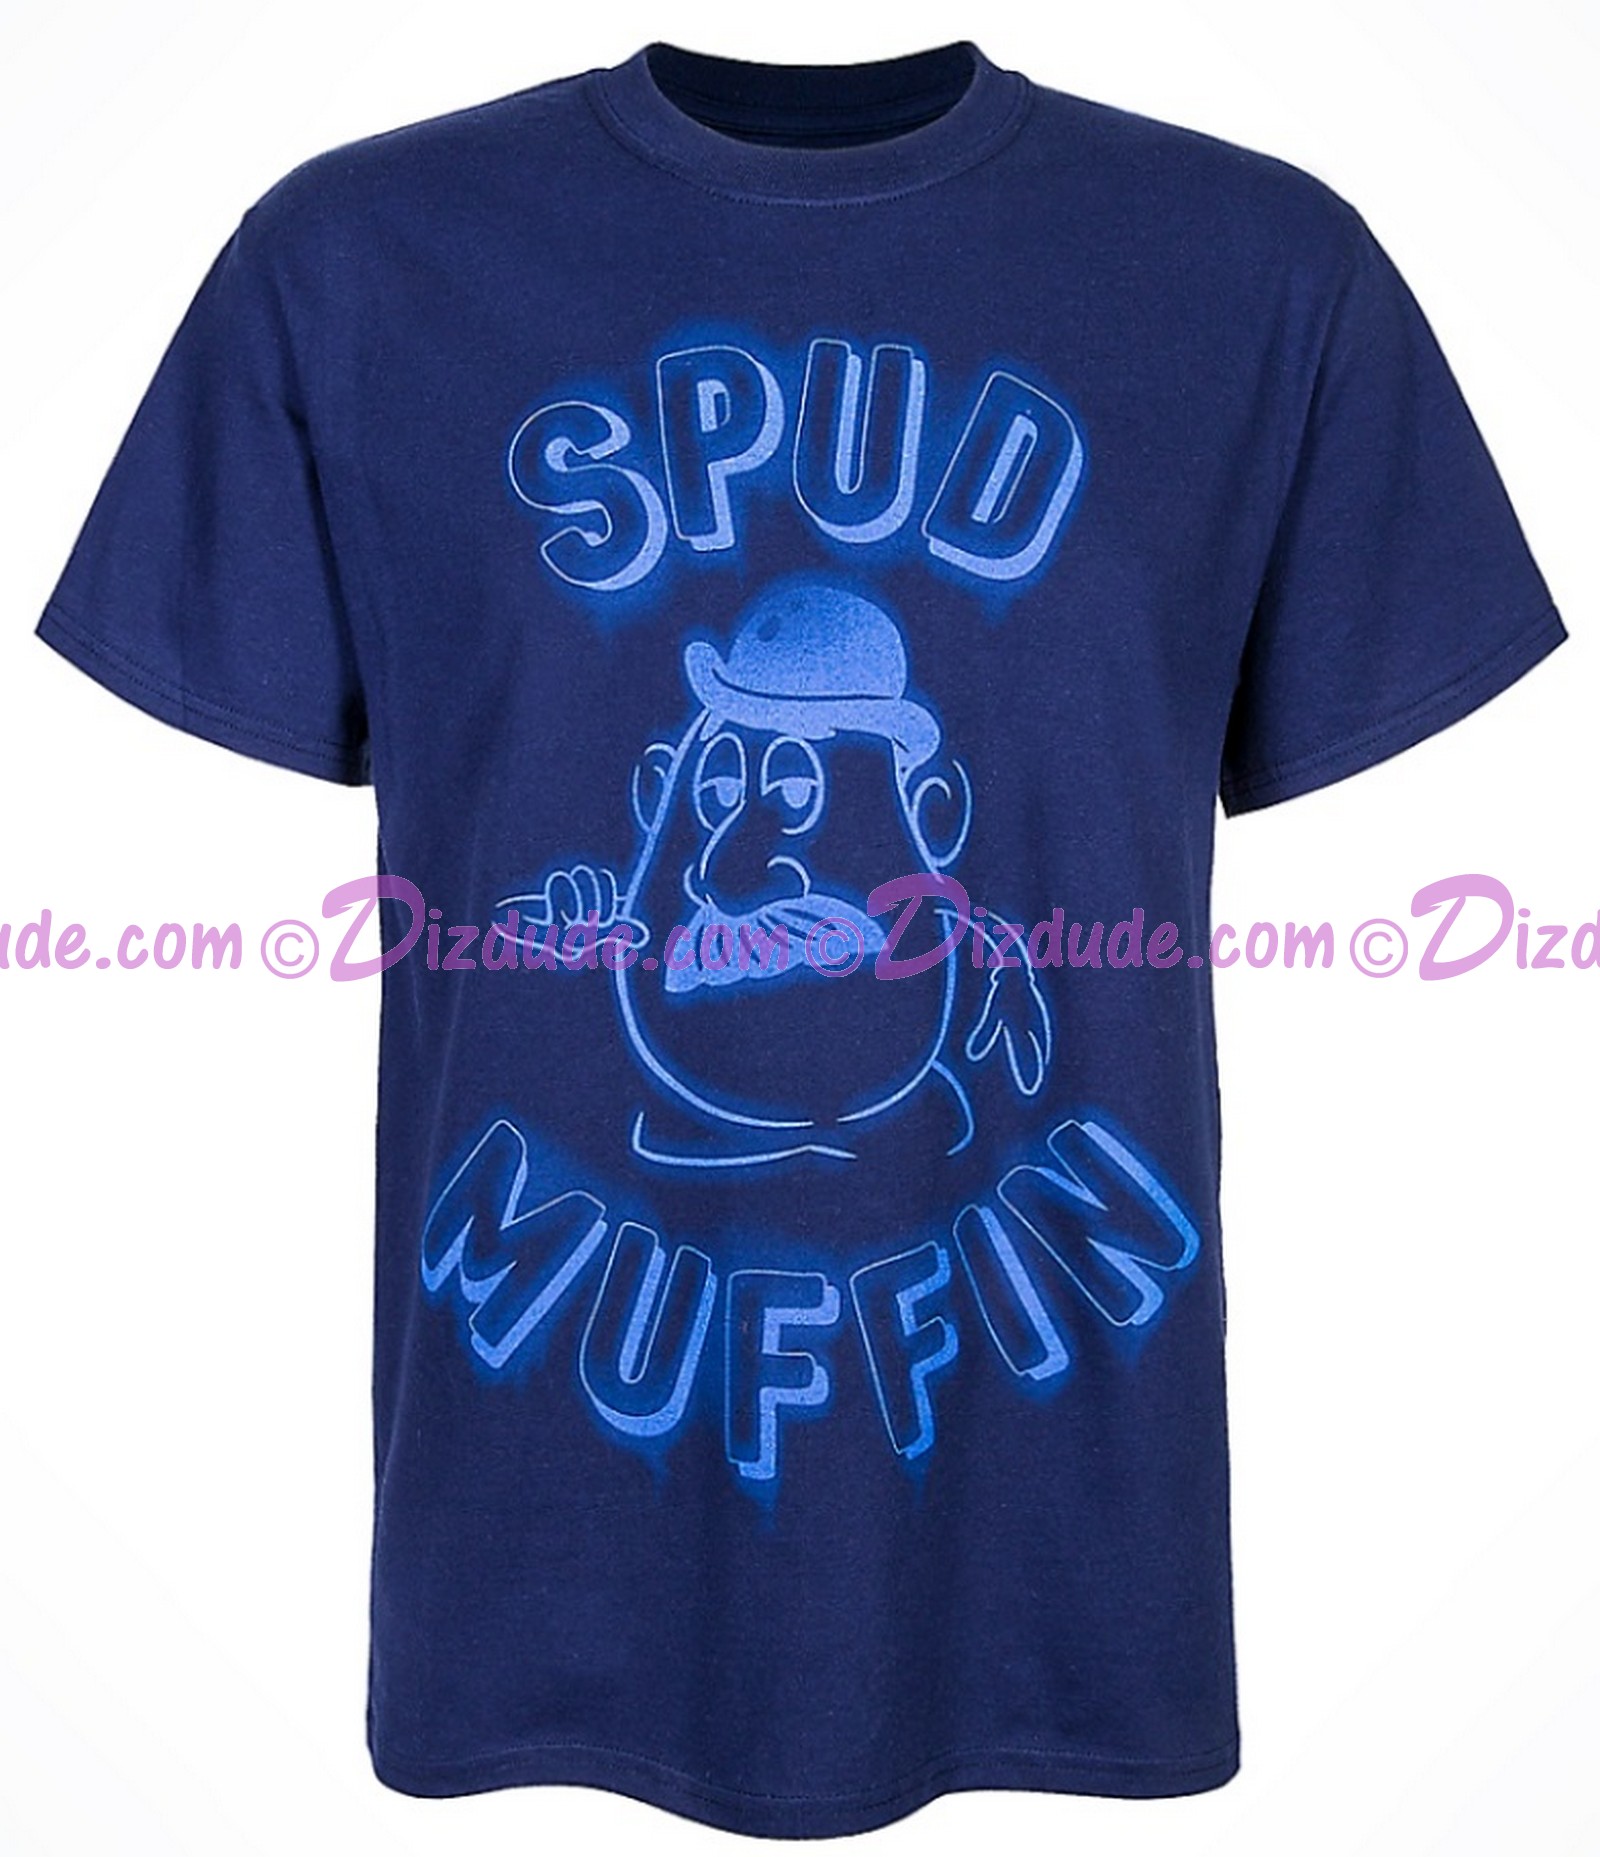 (SOLD OUT) Disney's Toy Story Land Mr. Potato Head - Spud Muffin Adult T-Shirt (Tee, Tshirt or T shirt)